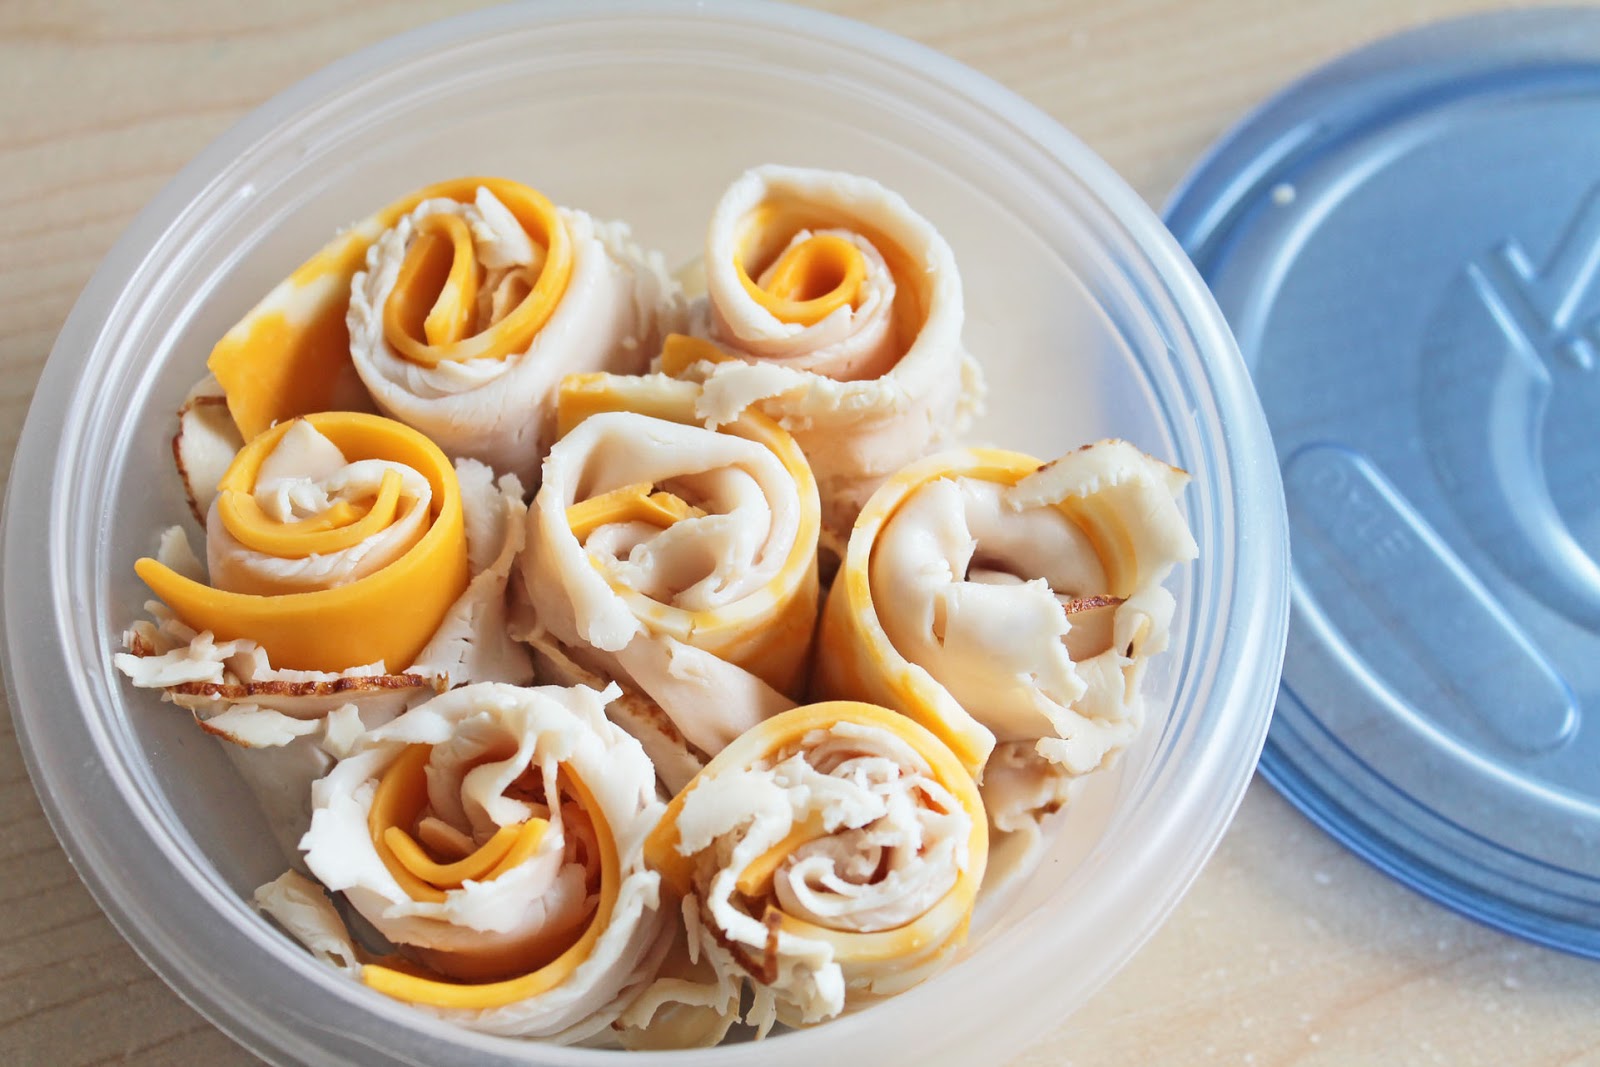 easy-to-make-snacks-turkey-and-cheese-rolls-recipe-healthy-snacks